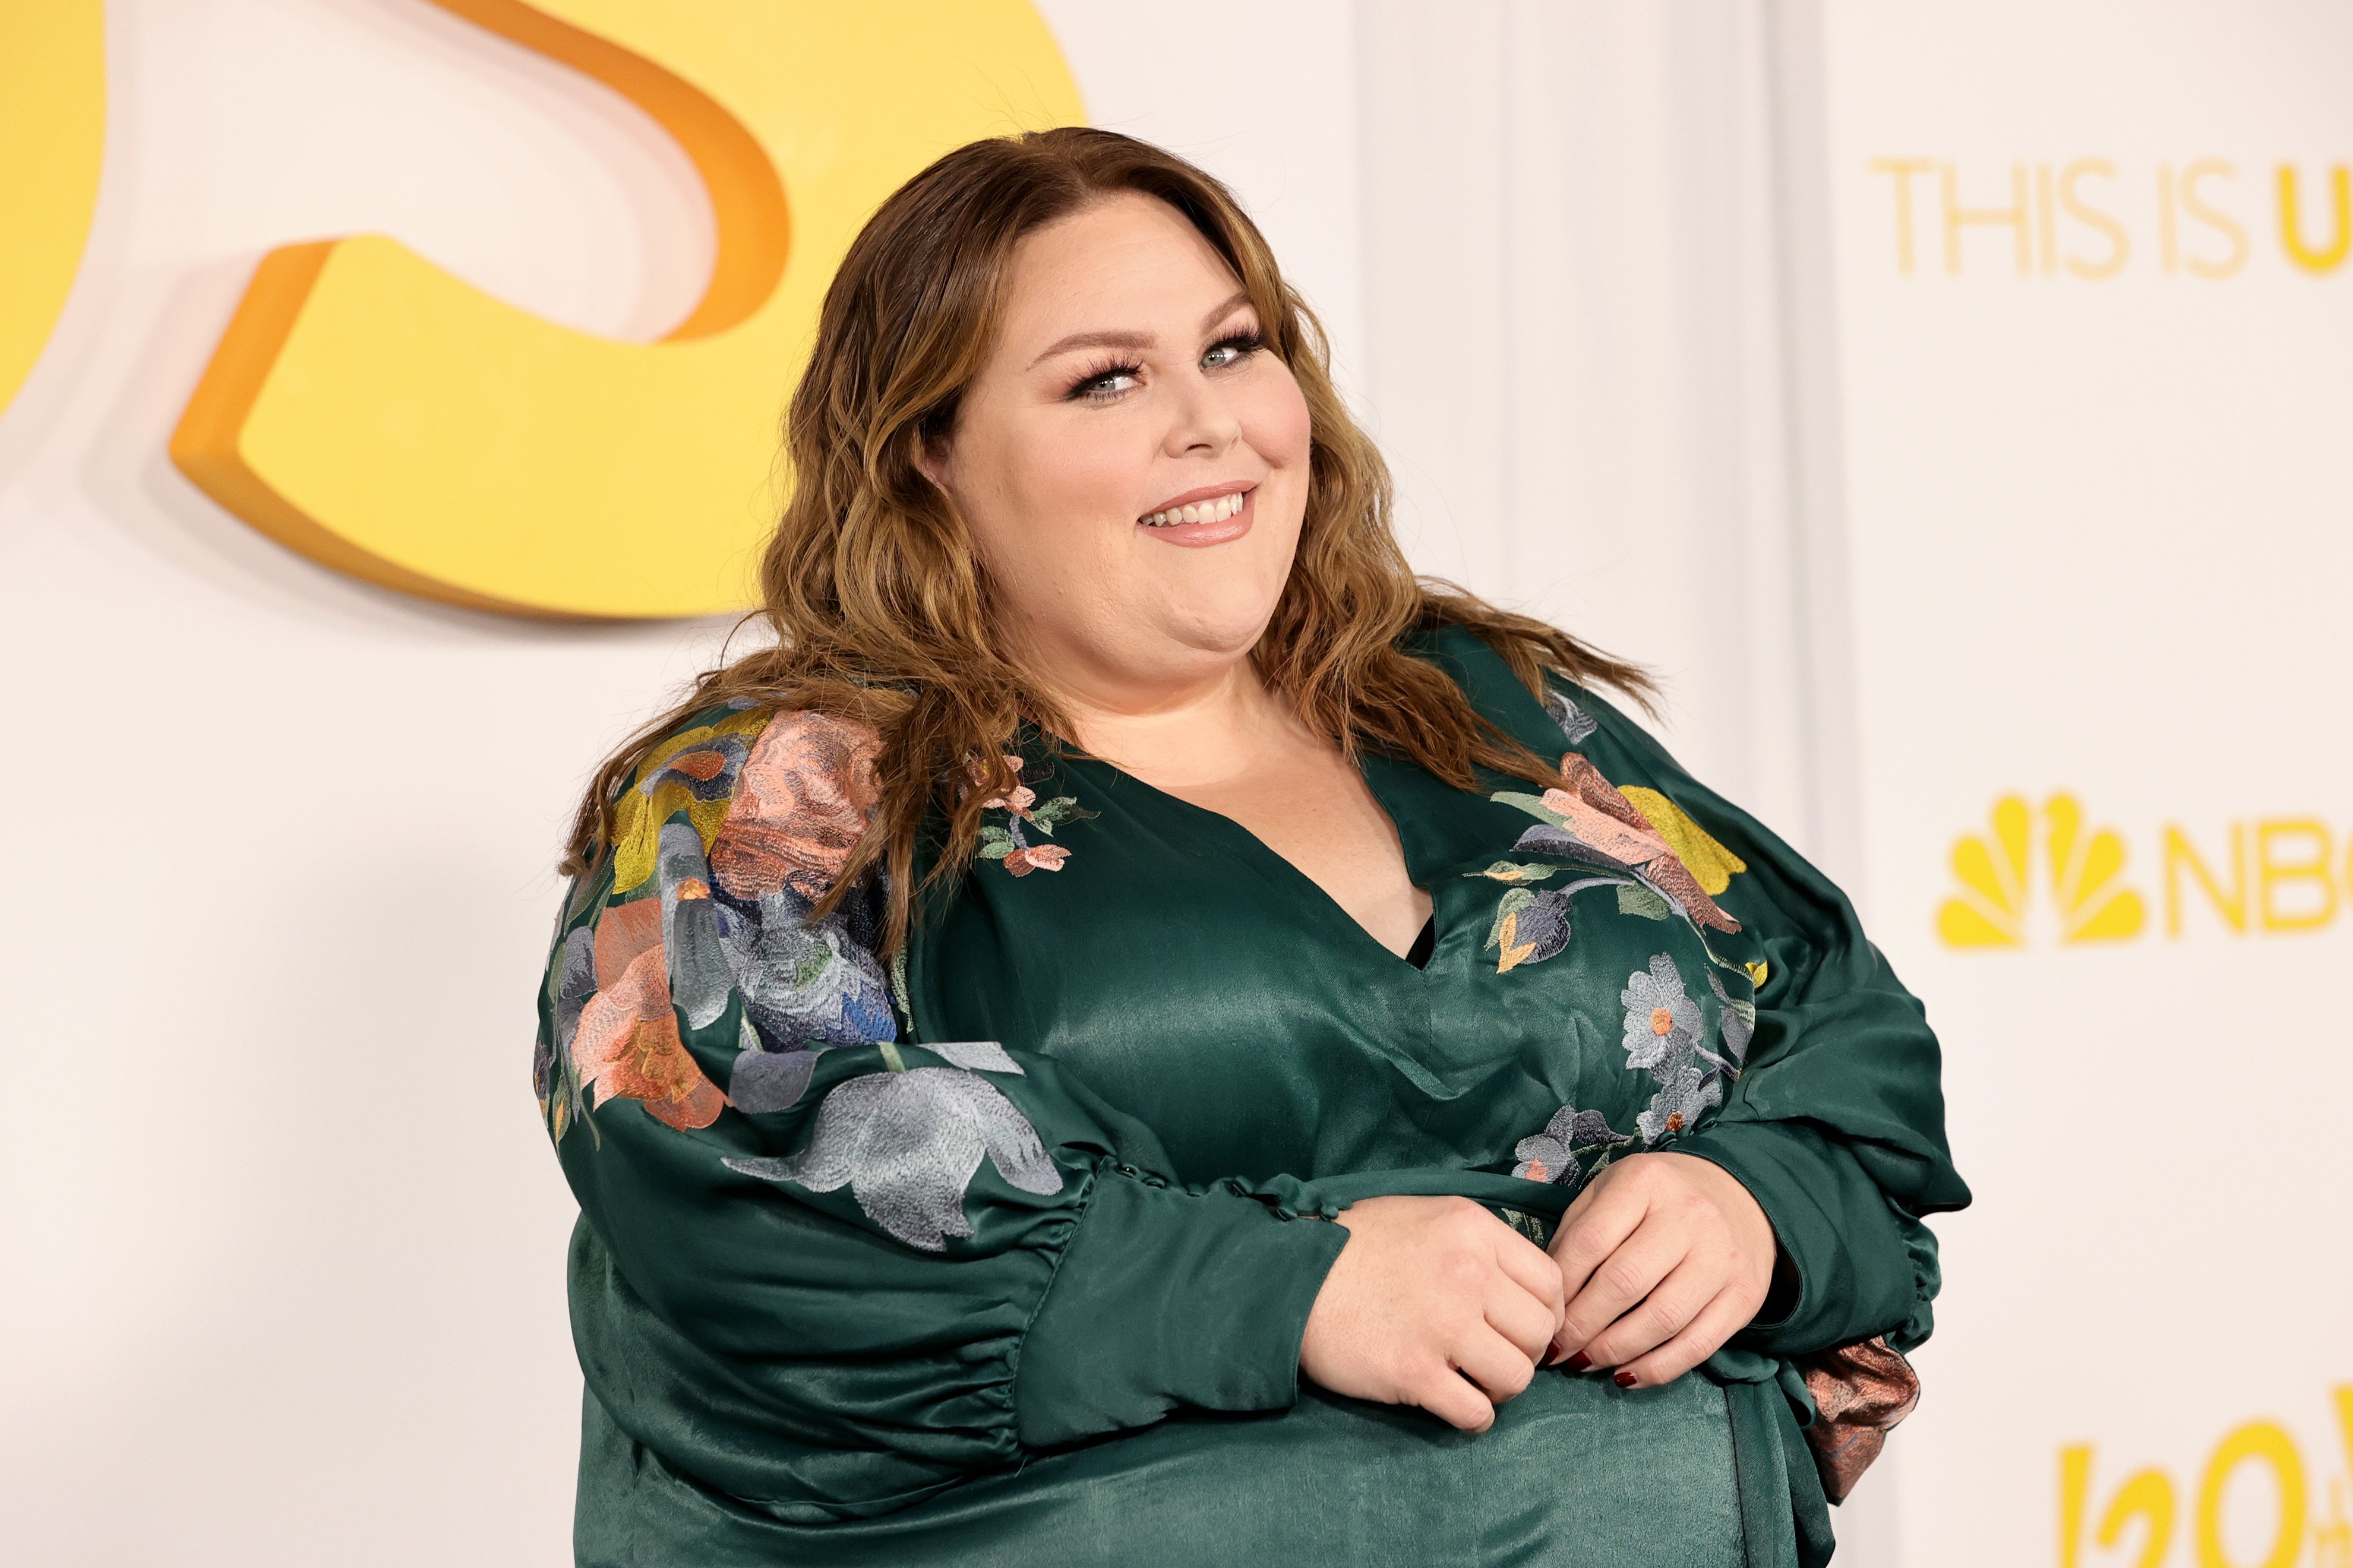 Chrissy Metz, who stars as Kate in 'This Is Us' Season 6, wears a dark green long-sleeved dress with blue, pink, and yellow flowers on it.